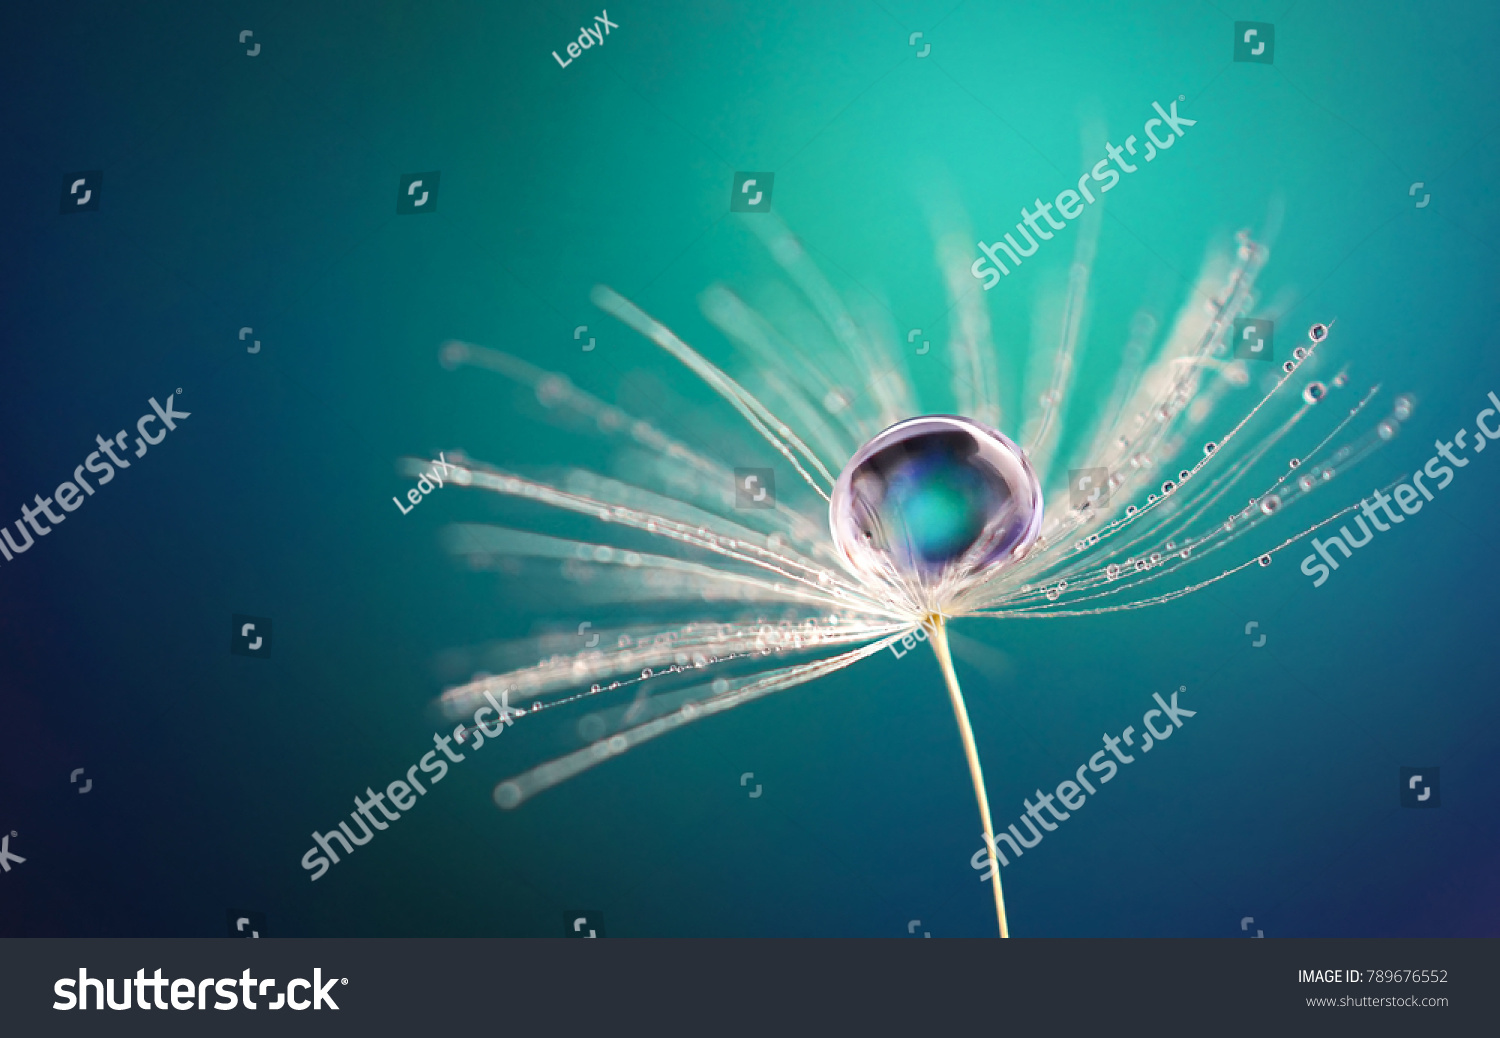 Beautiful water drop on a dandelion flower seed macro in nature. Beautiful deep saturated blue and turquoise background, free space for text. Bright colorful expressive artistic image form. #789676552